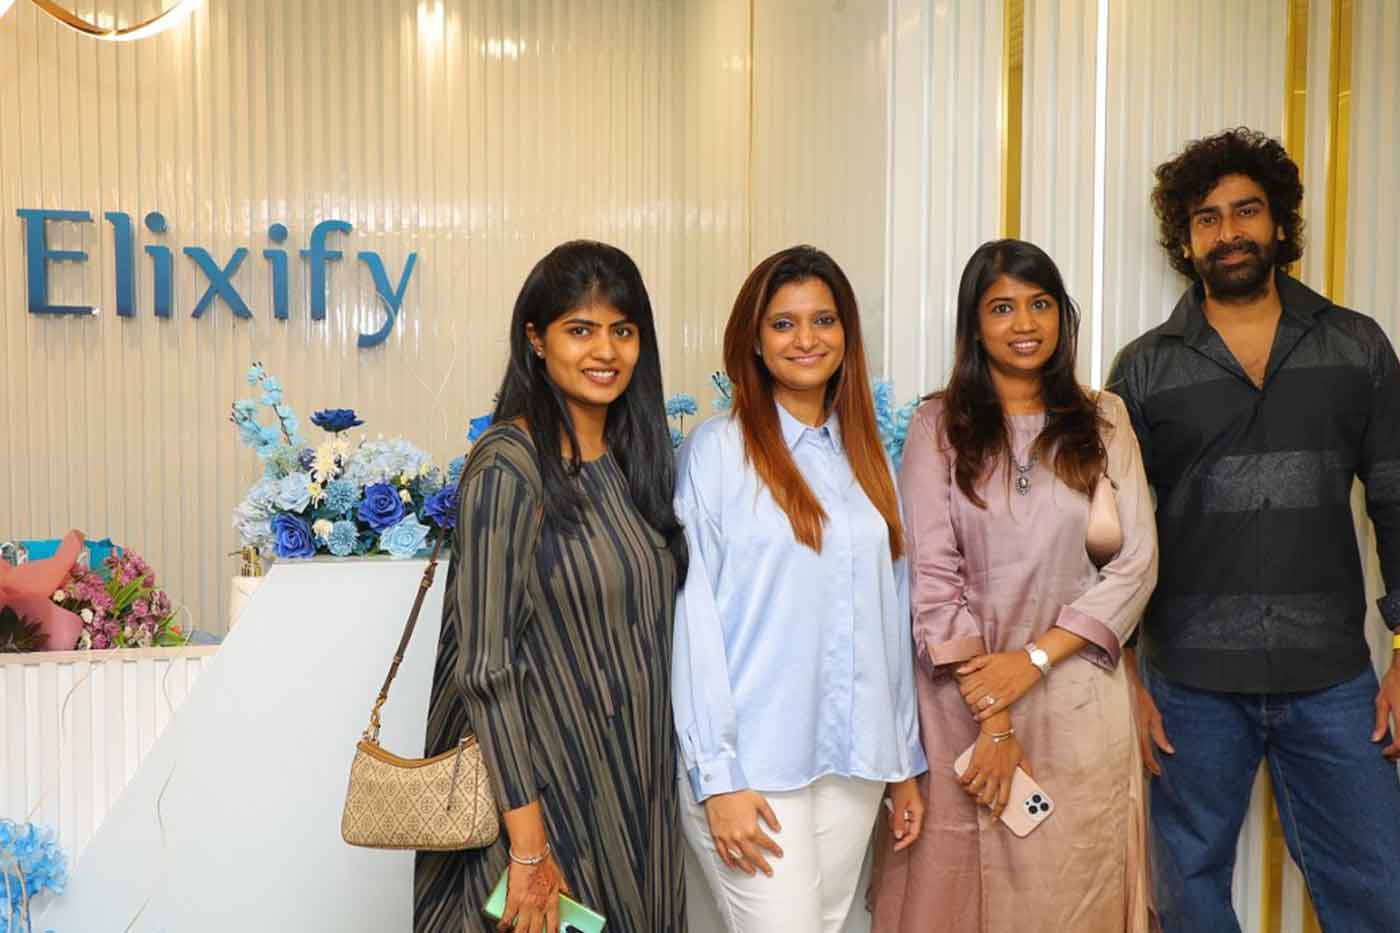 Elixify opens luxurious clinic for beauty and wellness in India